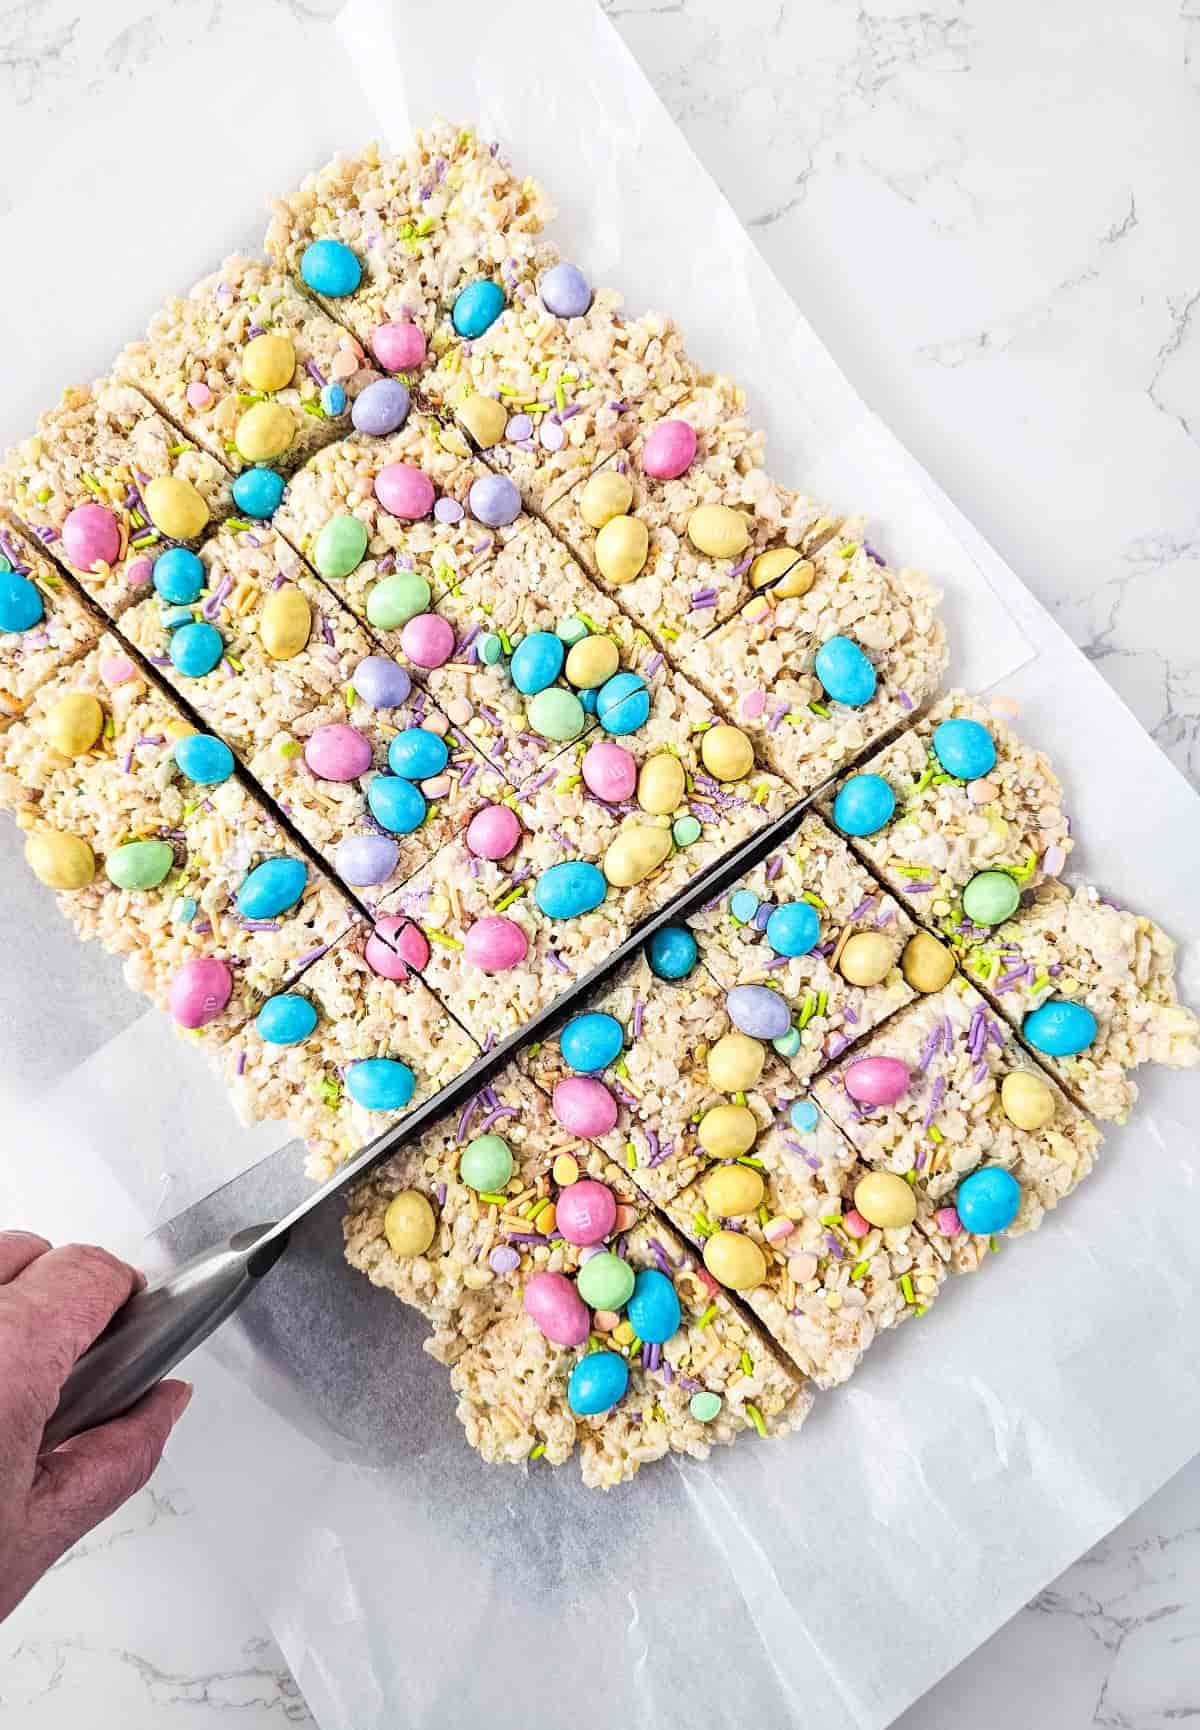 Slicing a tray of rice cereal treats decorated with pastel-colored M&M peanut candies.